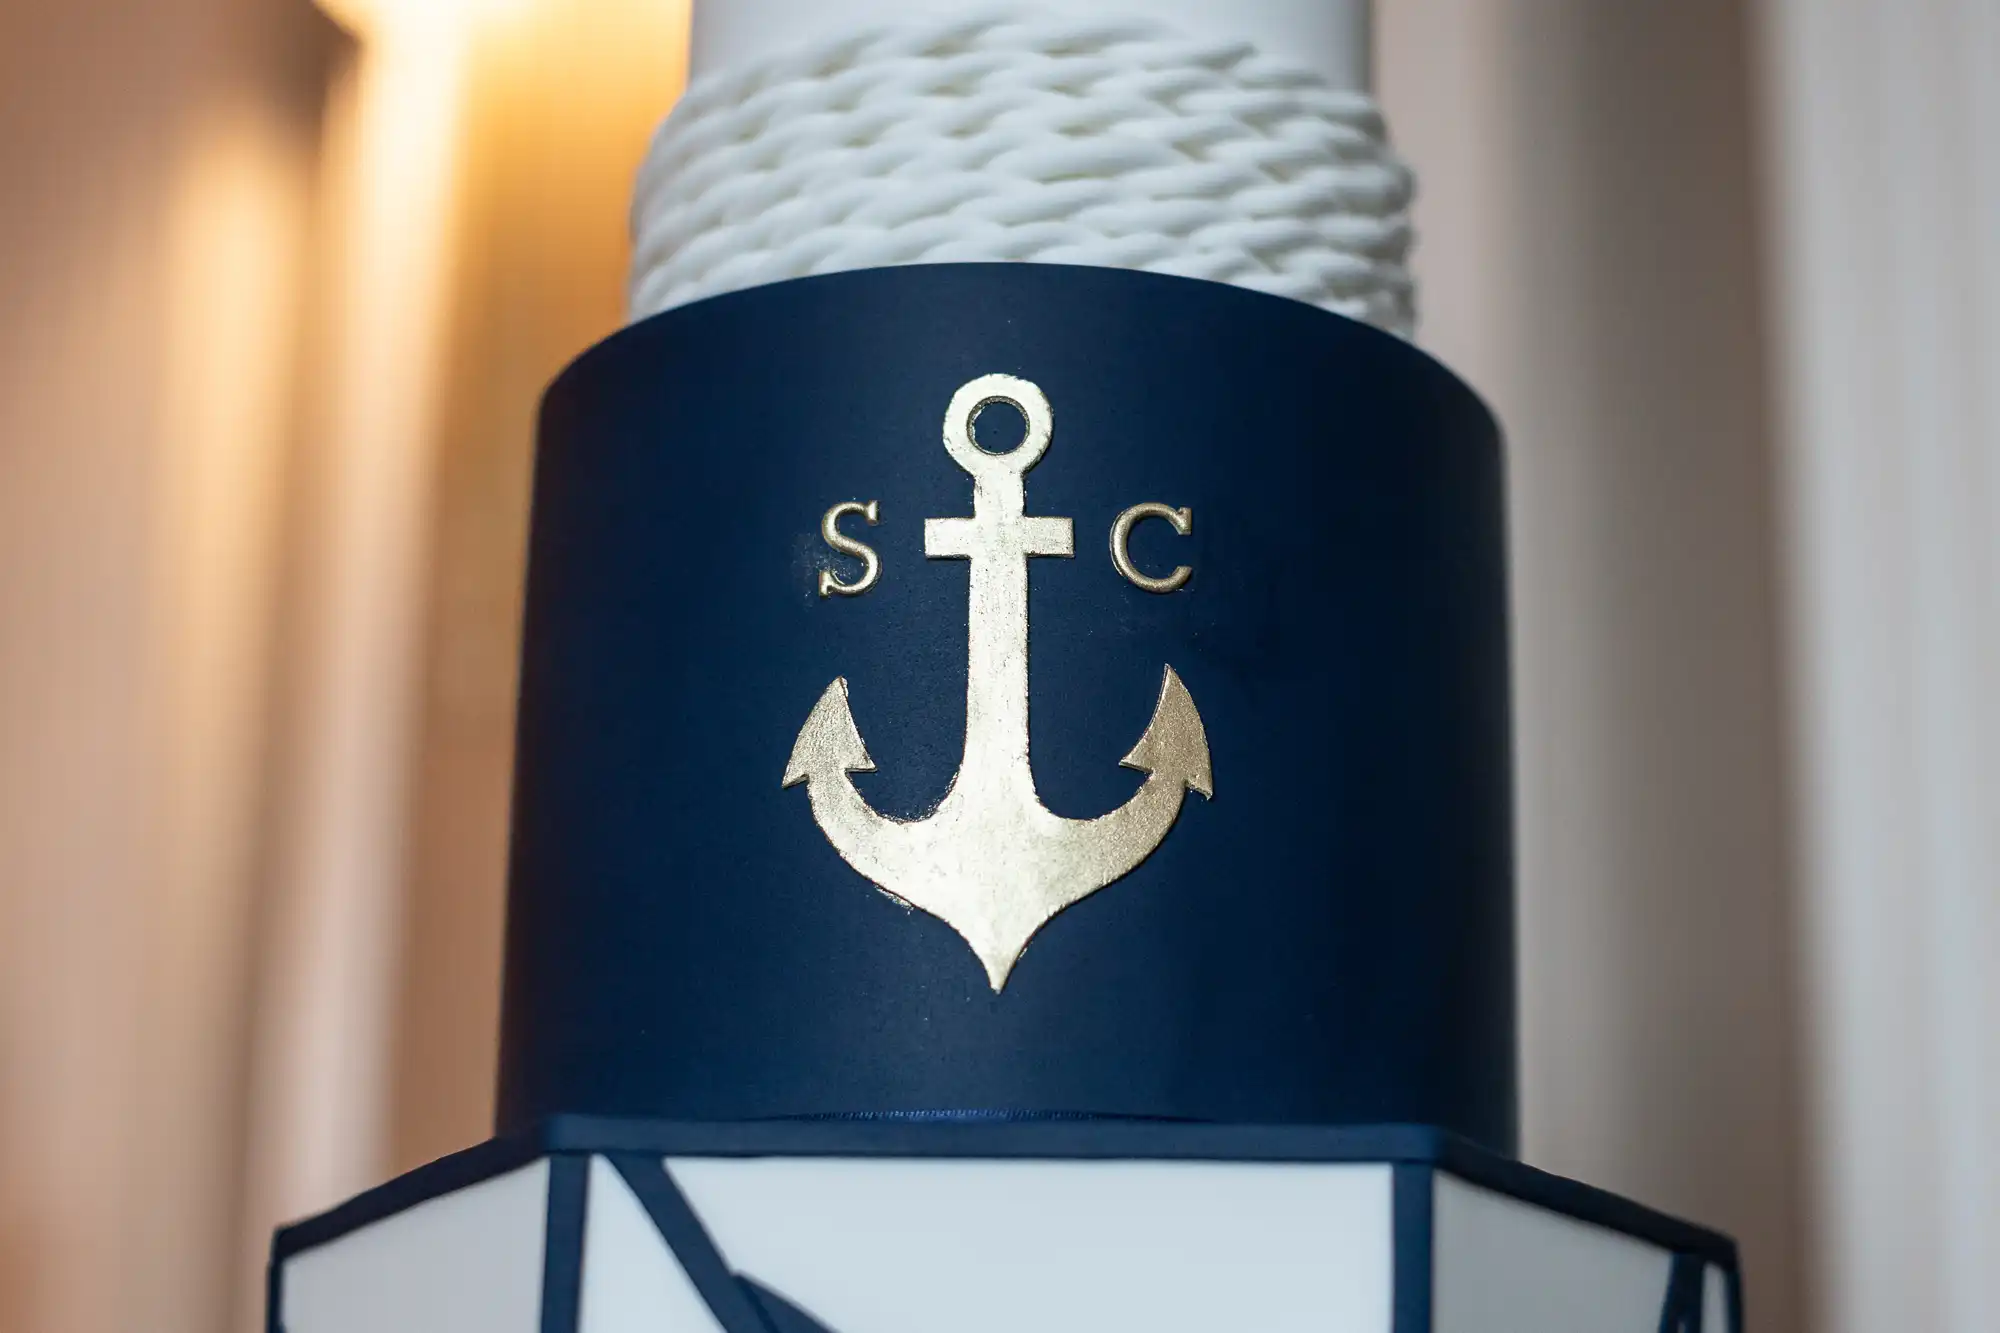 Close-up of a cake decorated with a blue band displaying a gold anchor and the initials "S" and "C". The cake appears to be nautical-themed.